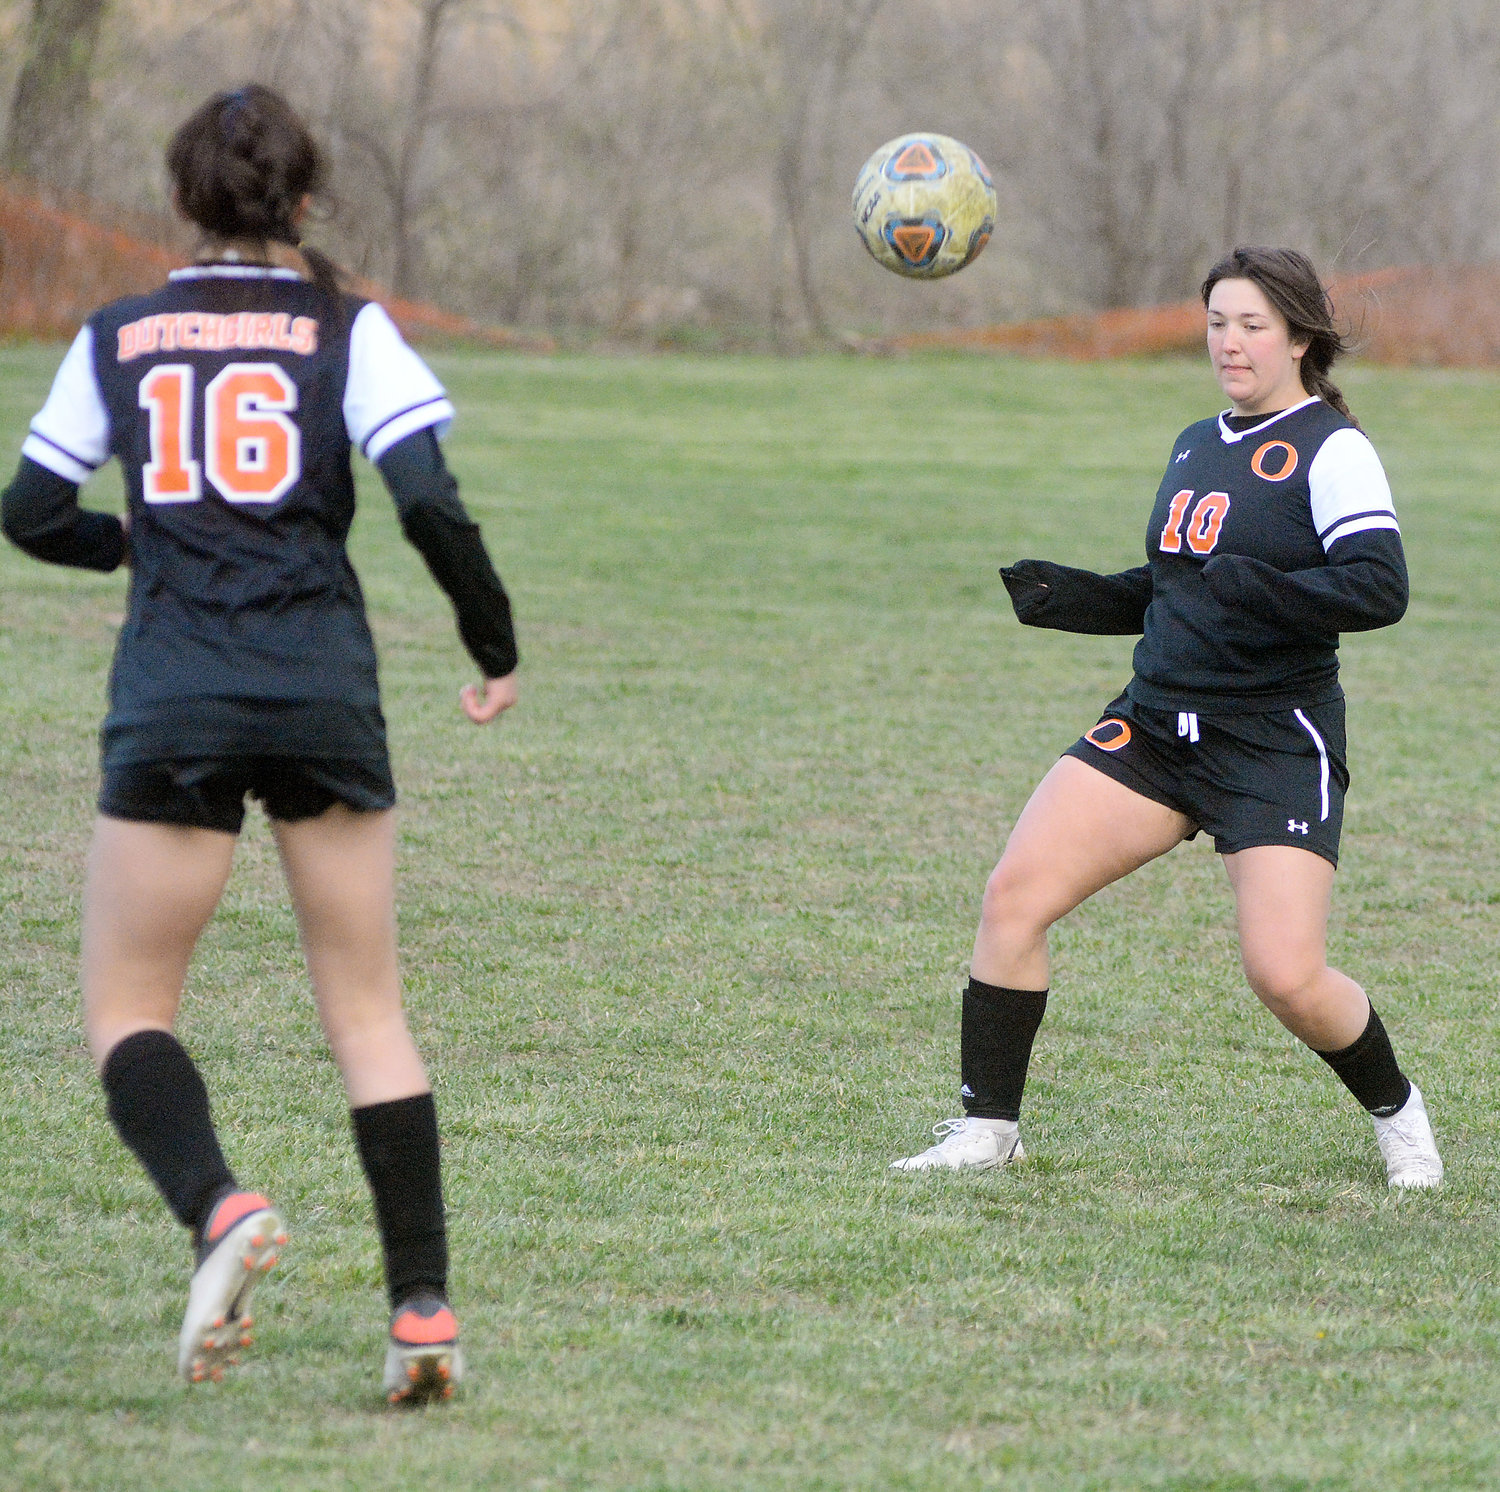 Avery Bastunas (right) waits for the ball to come down on the ground before playing it during the Dixon Girls Soccer Tournament last week against Belle’s Lady Tigers. OHS will have four home matches next week beginning Monday against Battle (Columbia) at 5:30 p.m.